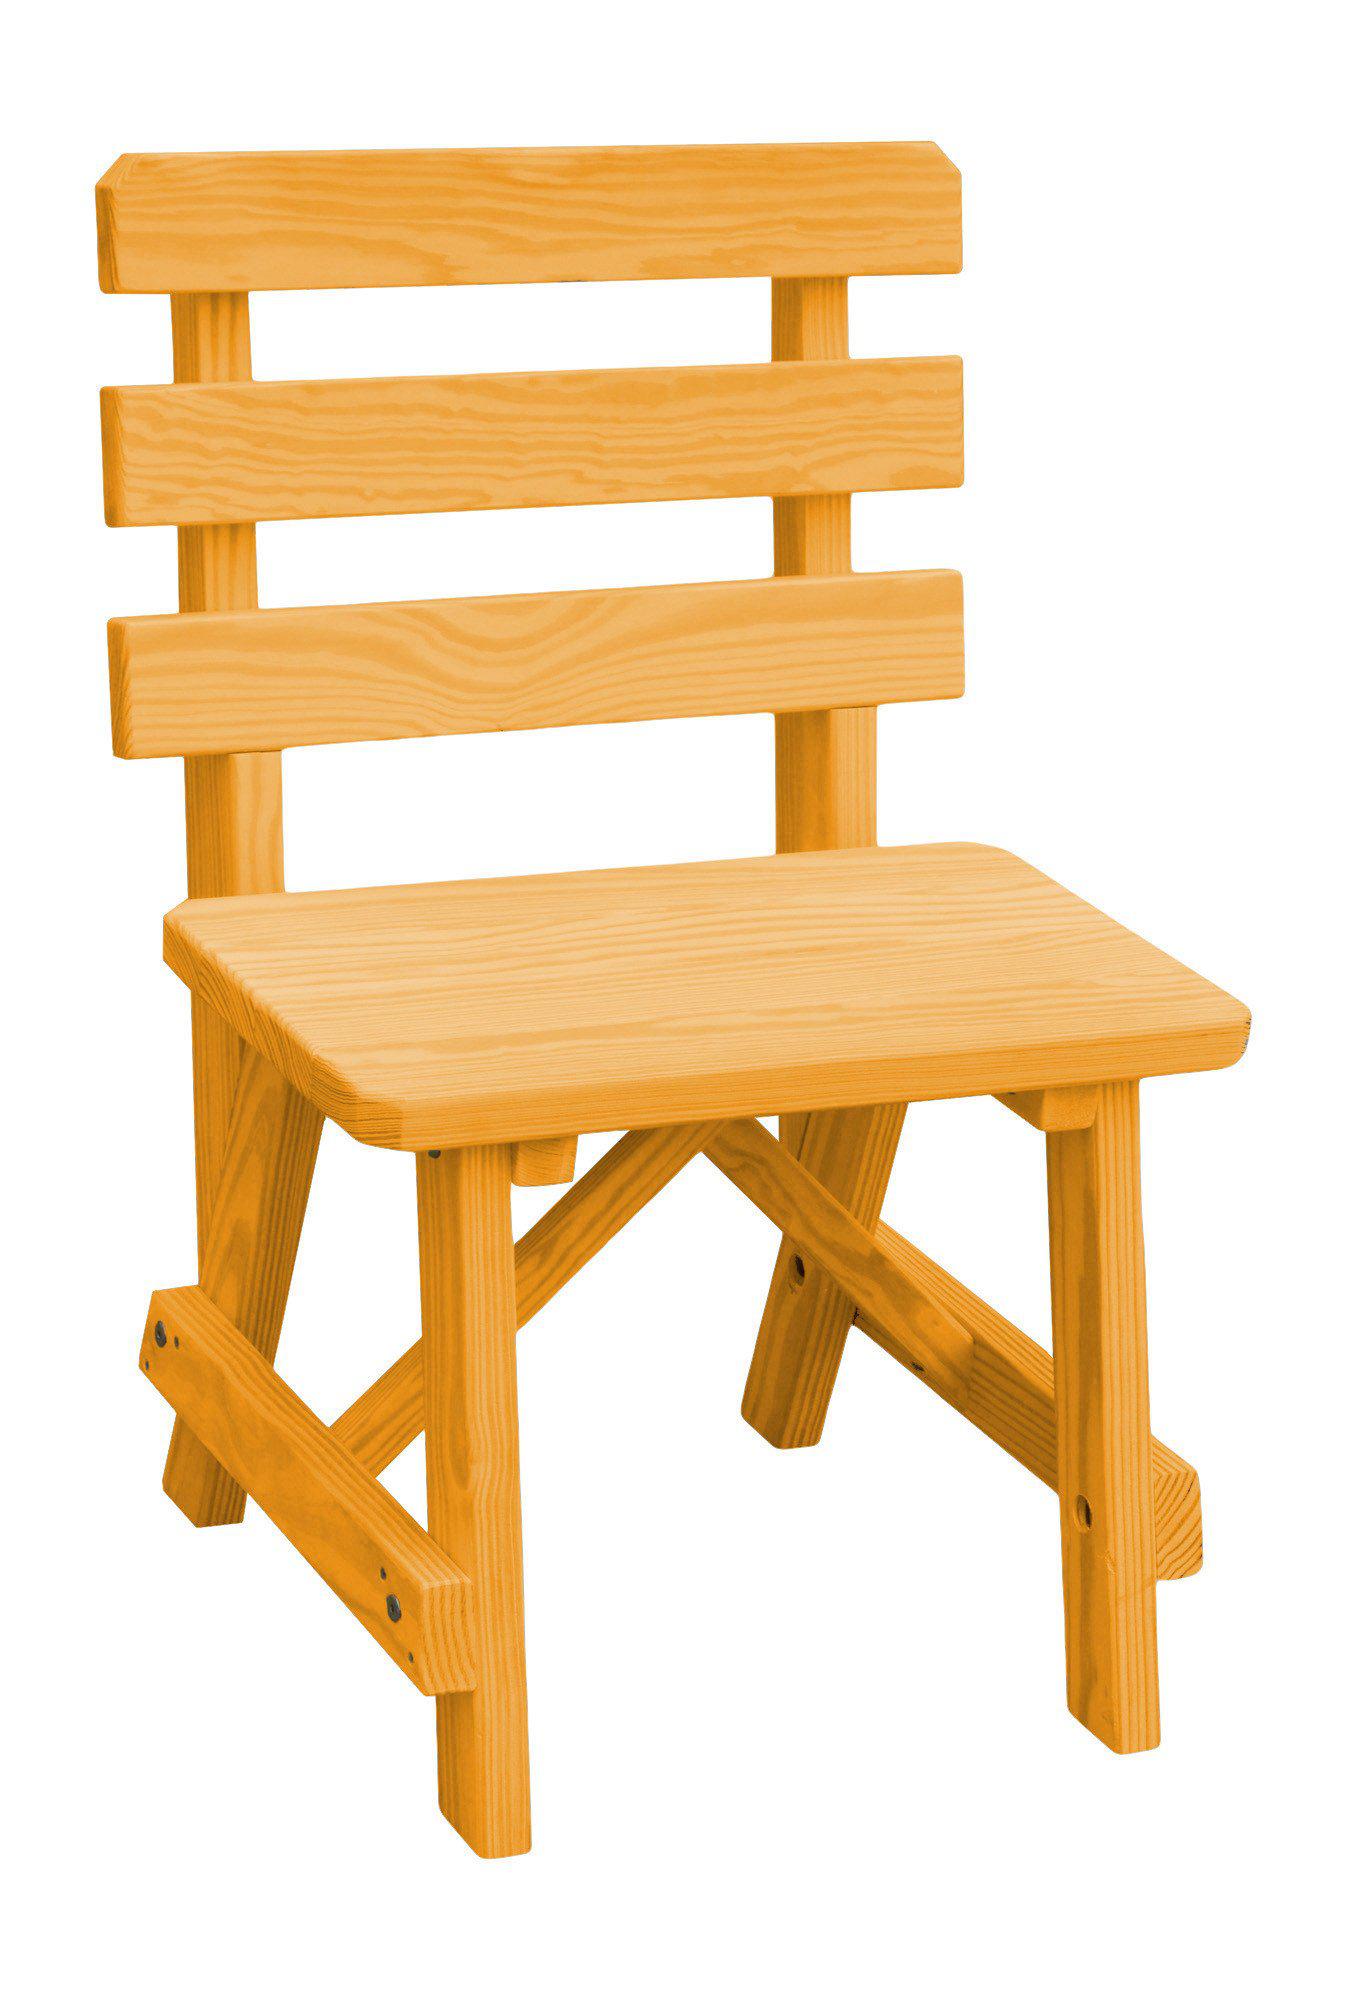 A&L Furniture Co. Yellow Pine 23" Traditional Backed Bench Only - LEAD TIME TO SHIP 10 BUSINESS DAYS